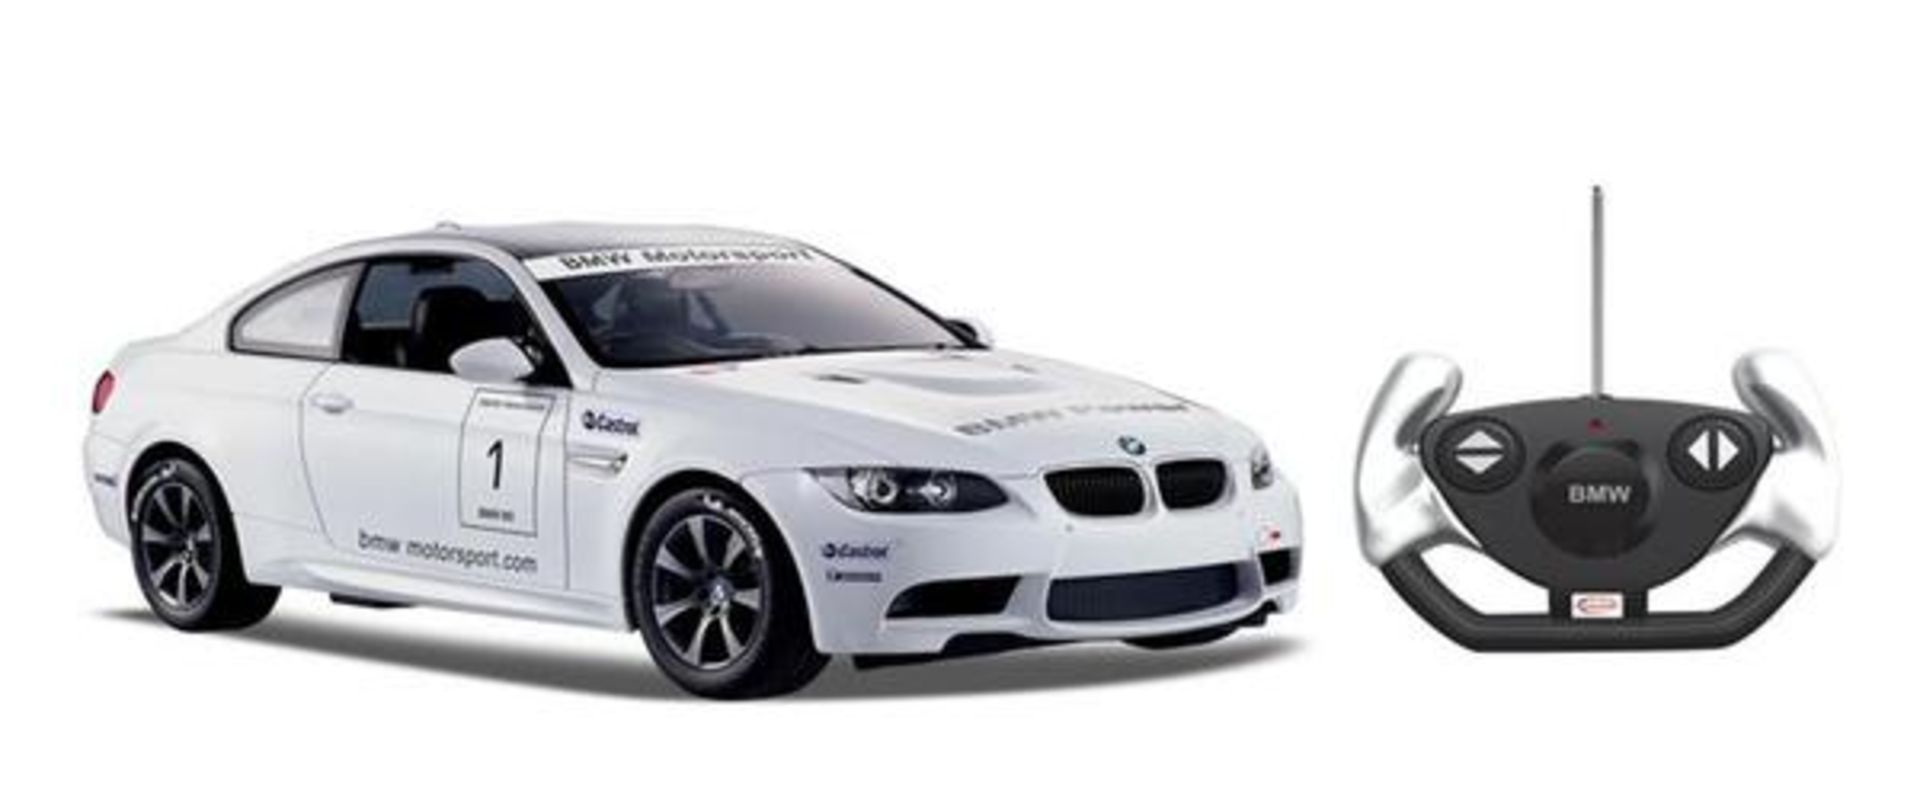 V Brand New 1:14 Radio Control BMW M3 With Foward And Reverse Lights - Officially Liscensed